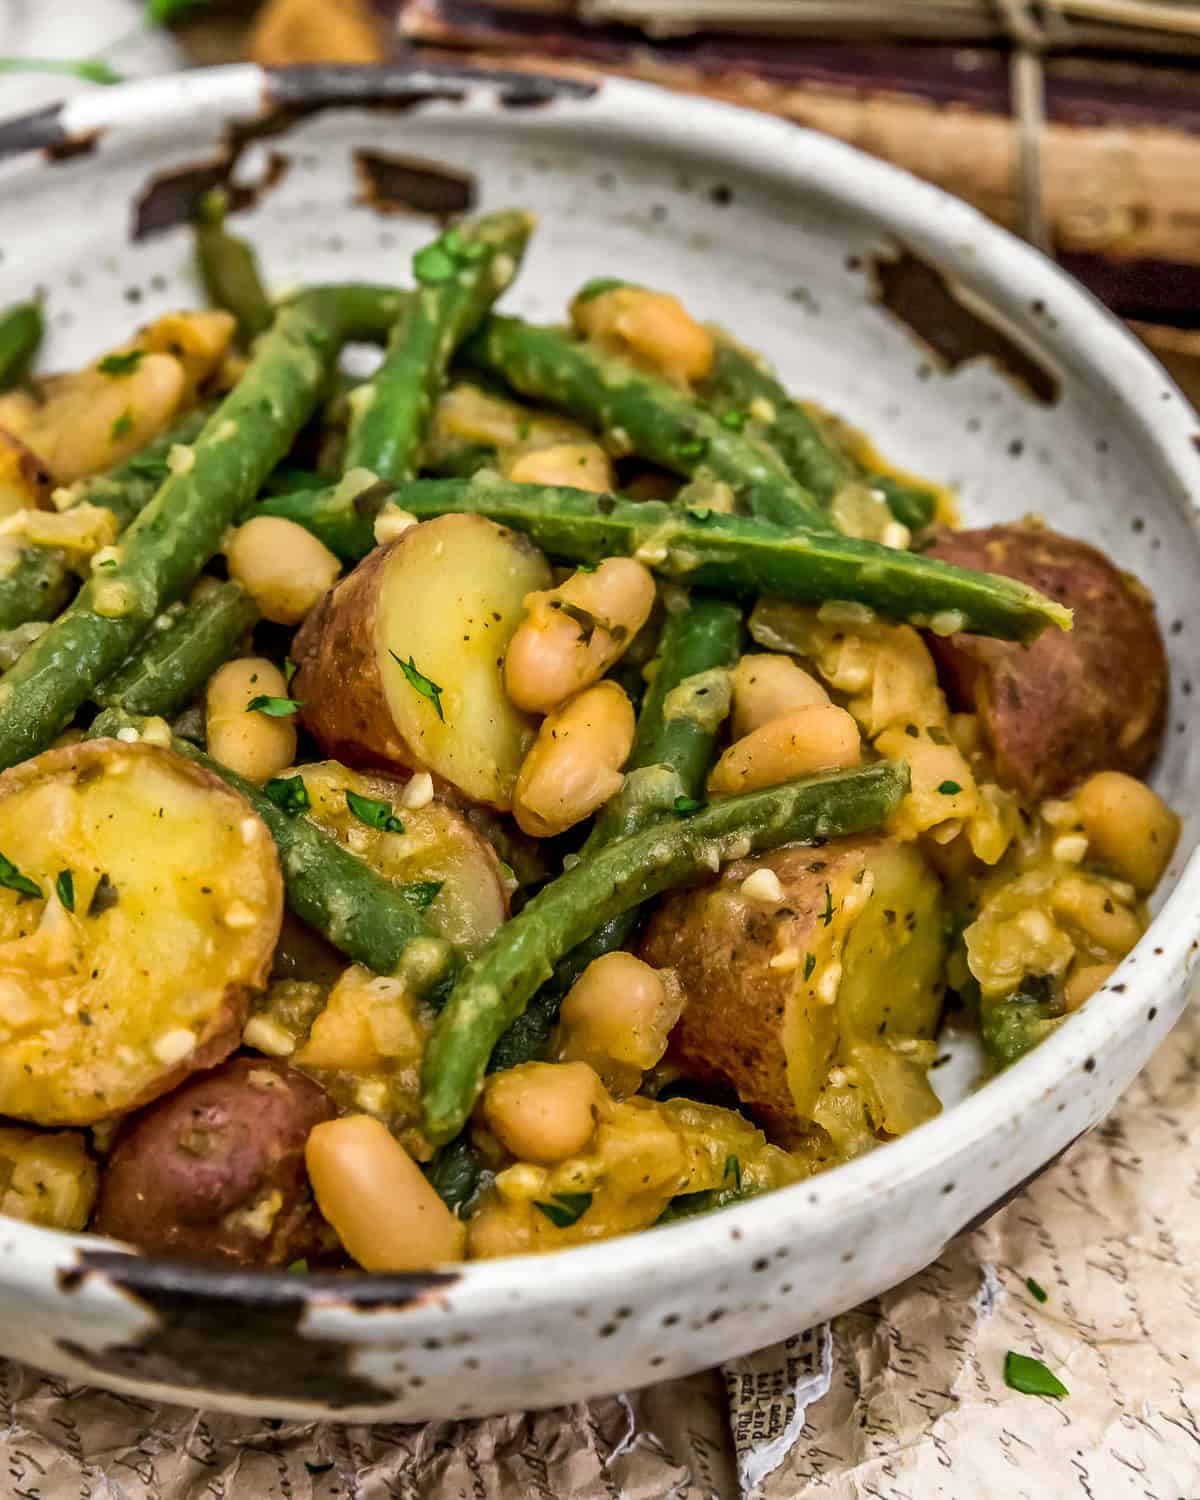 Bowl of Country Ranch Green Beans and Potato